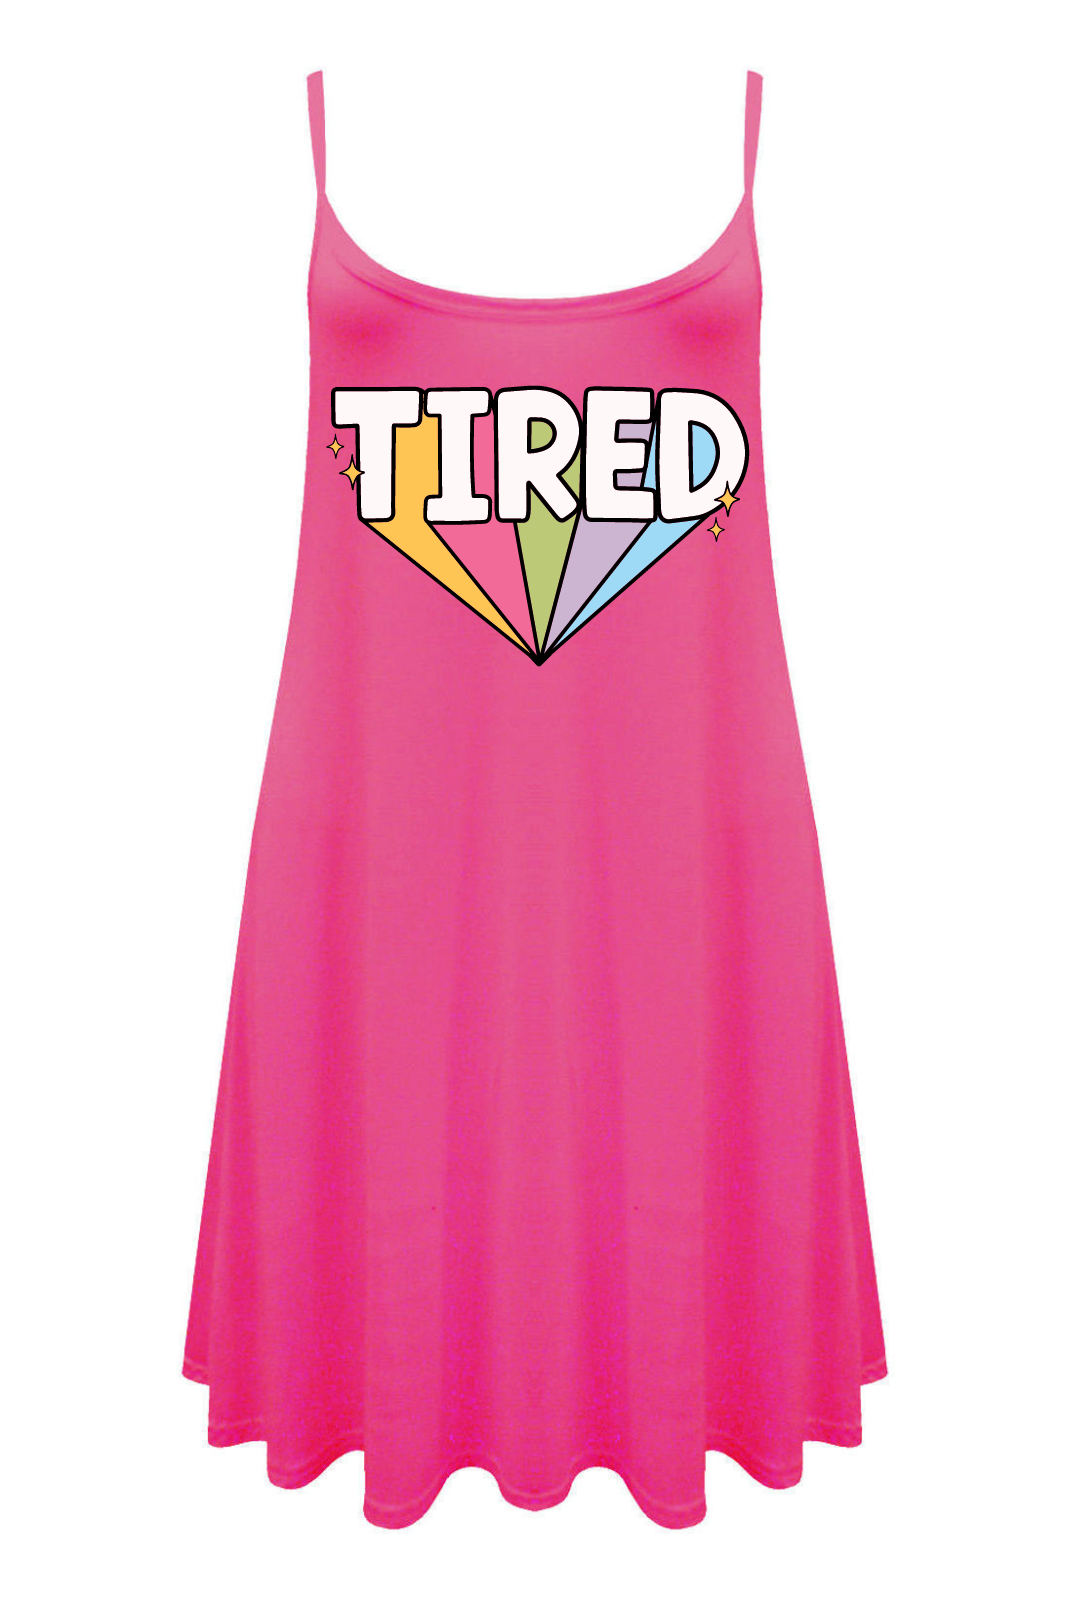 Hot Pink "Tired" Printed Longline Camisole